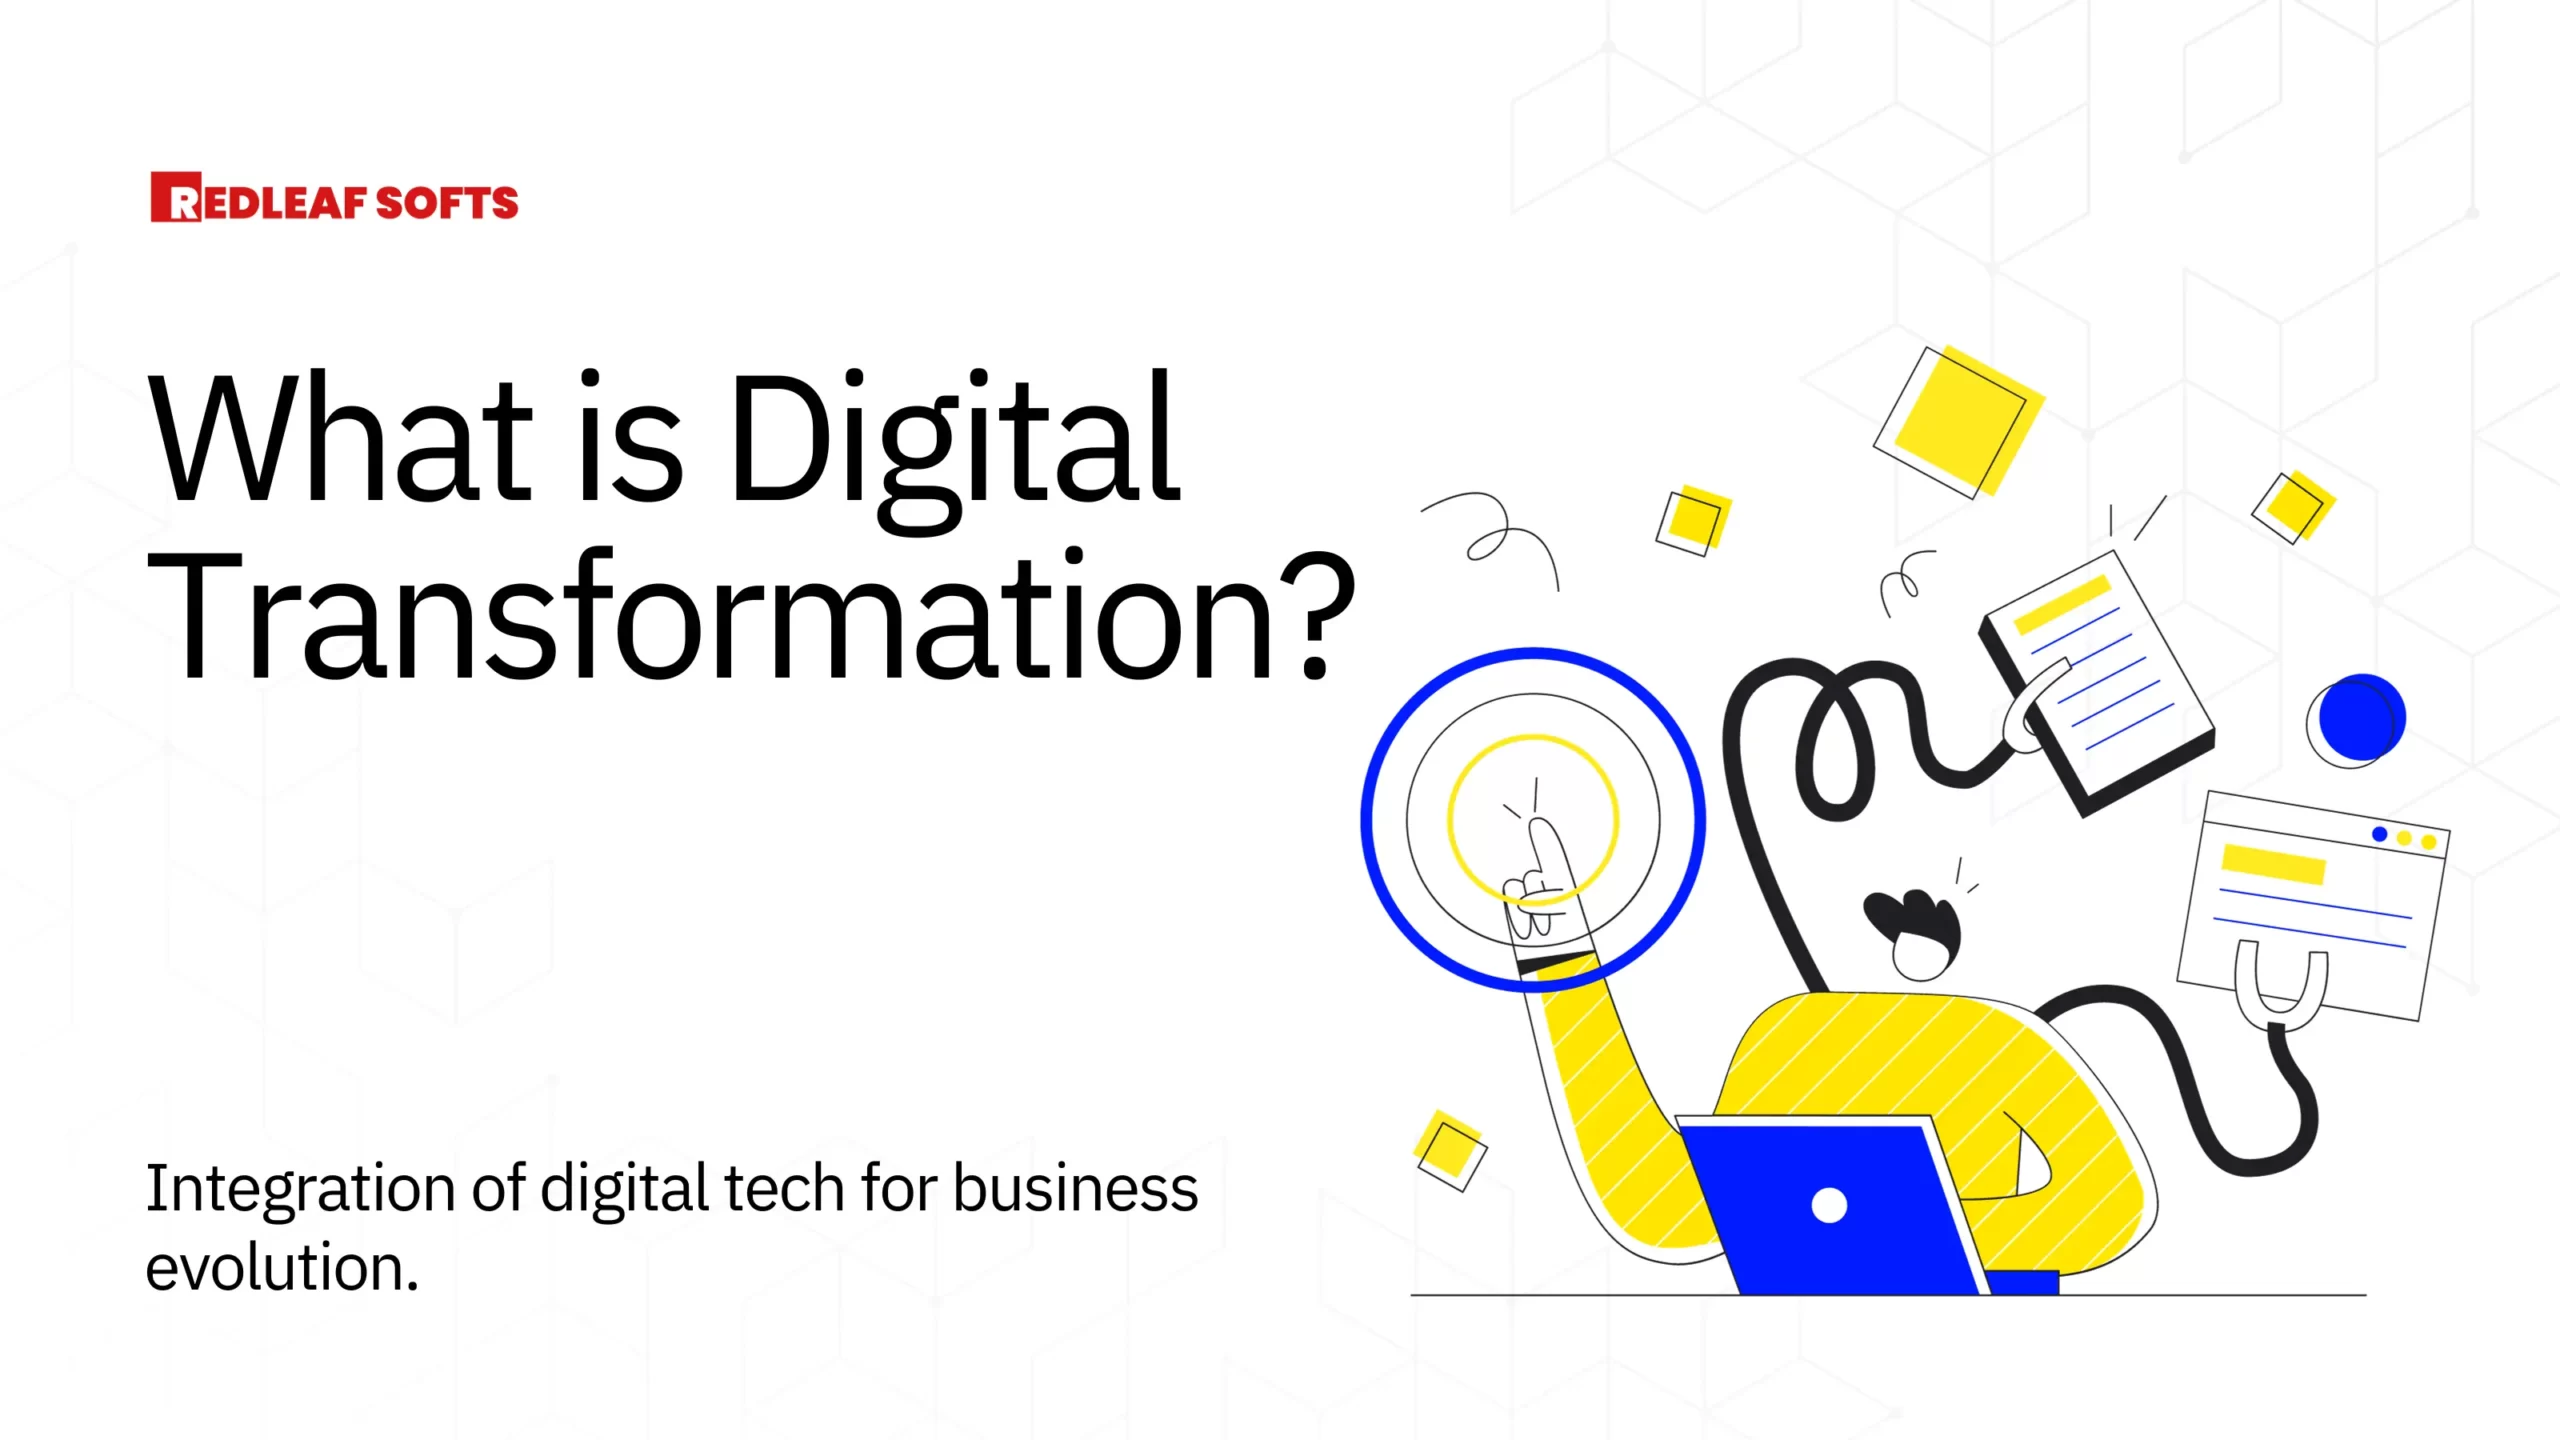 What is Digital Transformation & Why is it important?